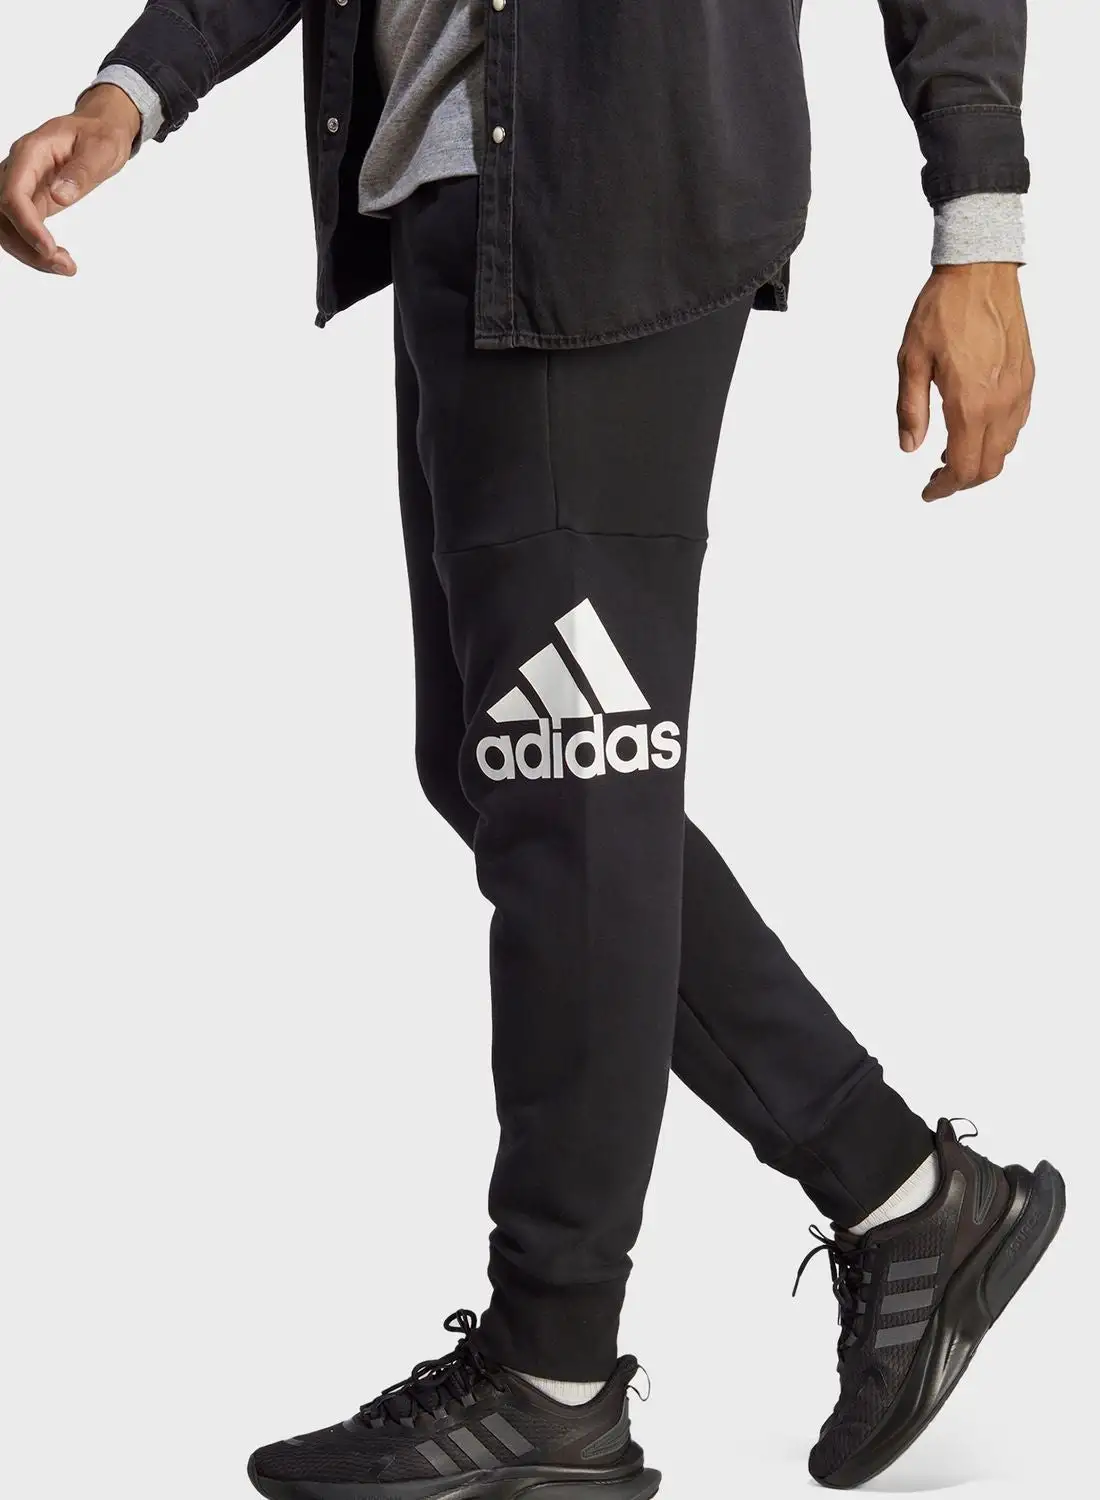 Adidas French Terry Sweatpants